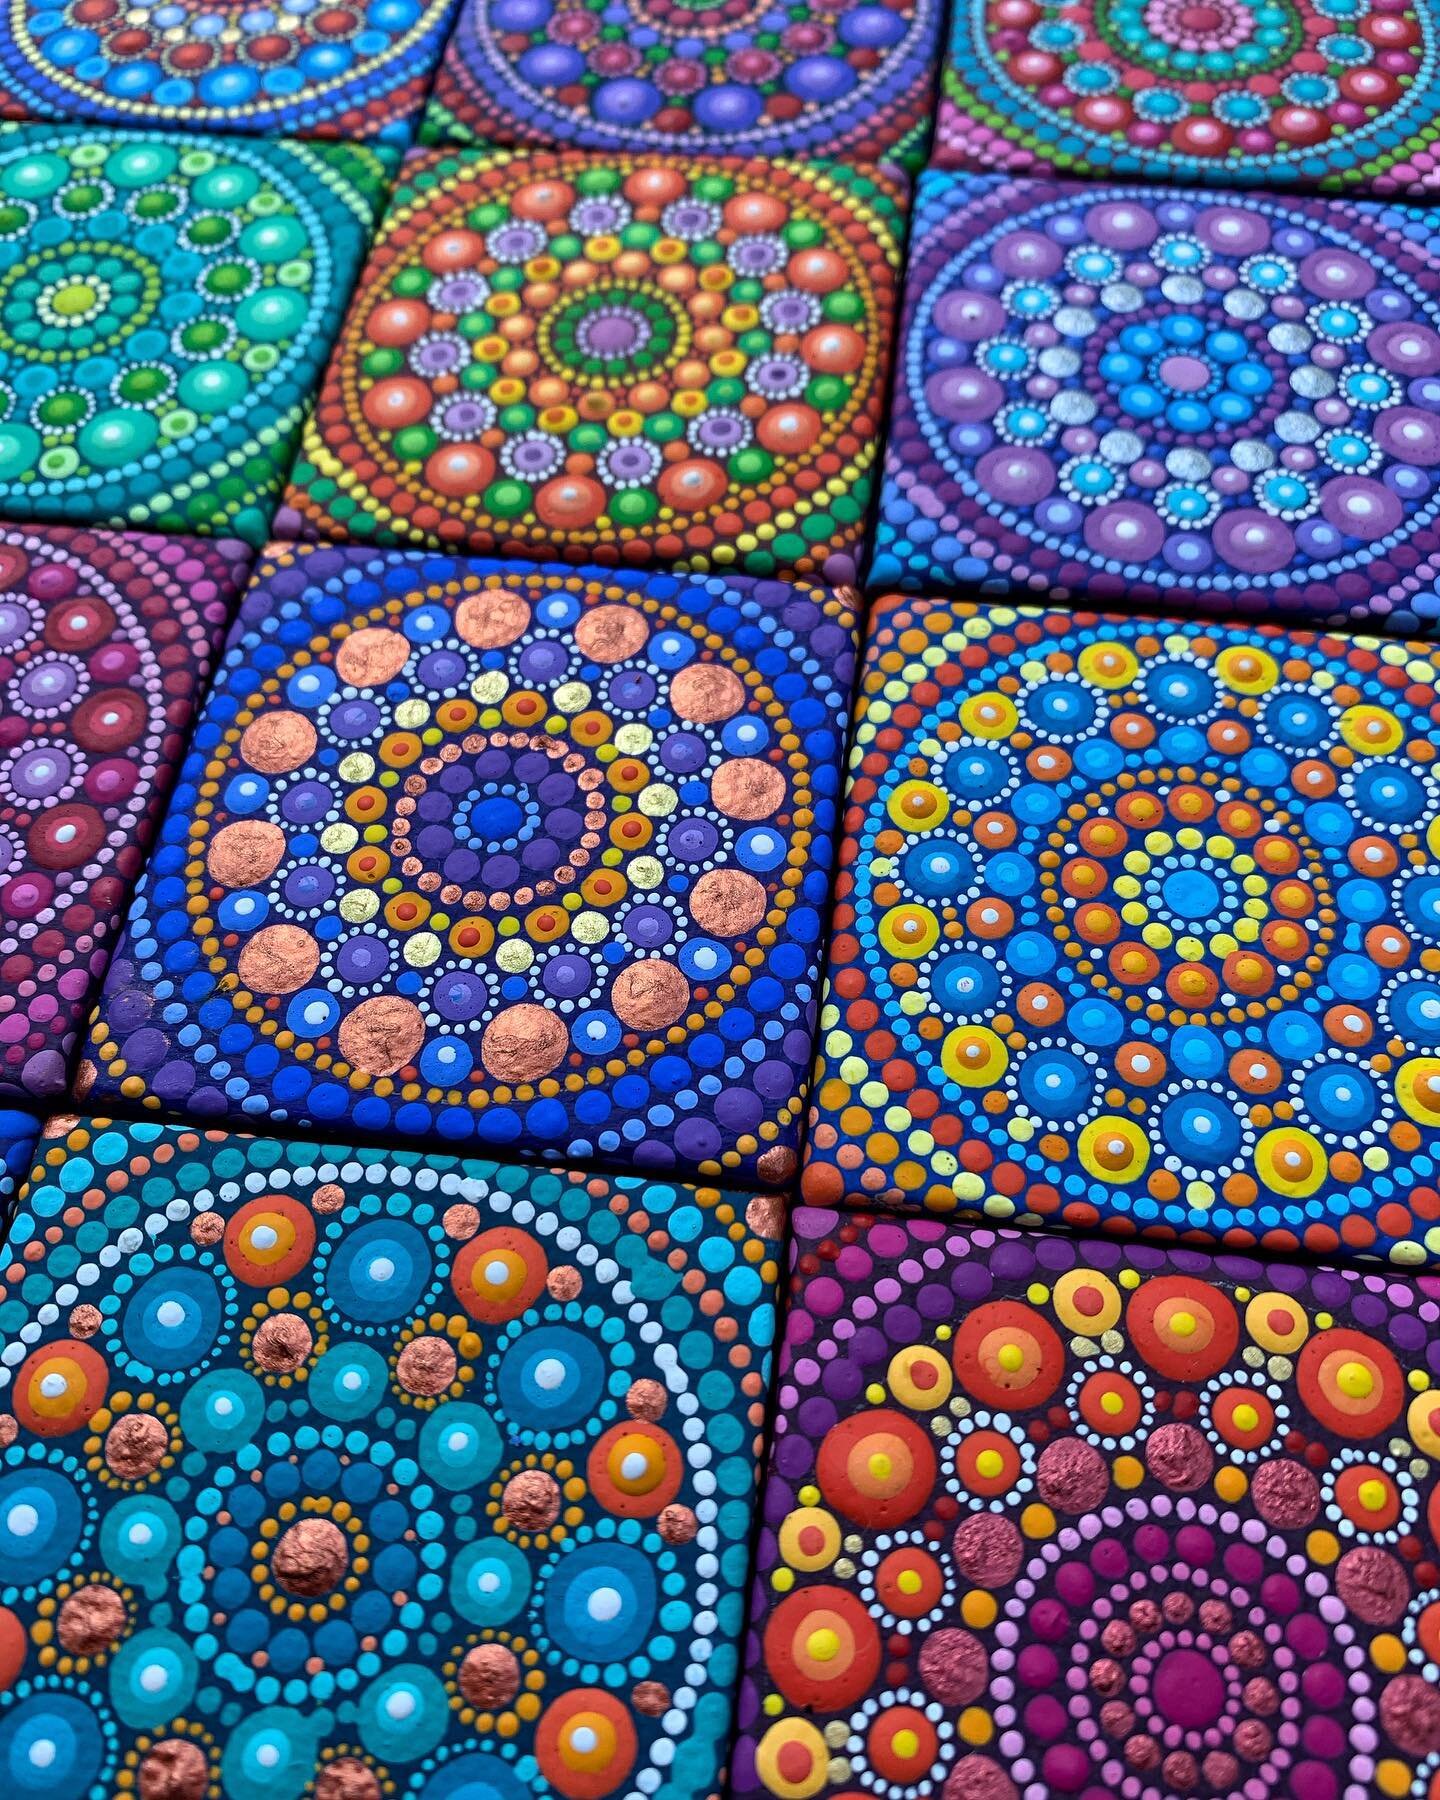 There&rsquo;s a fresh batch of mini mandalas available now! 
.
UPDATE- Sold out! Oh my thank you! Don&rsquo;t worry I you missed out- there&rsquo;s always more in the works 💖